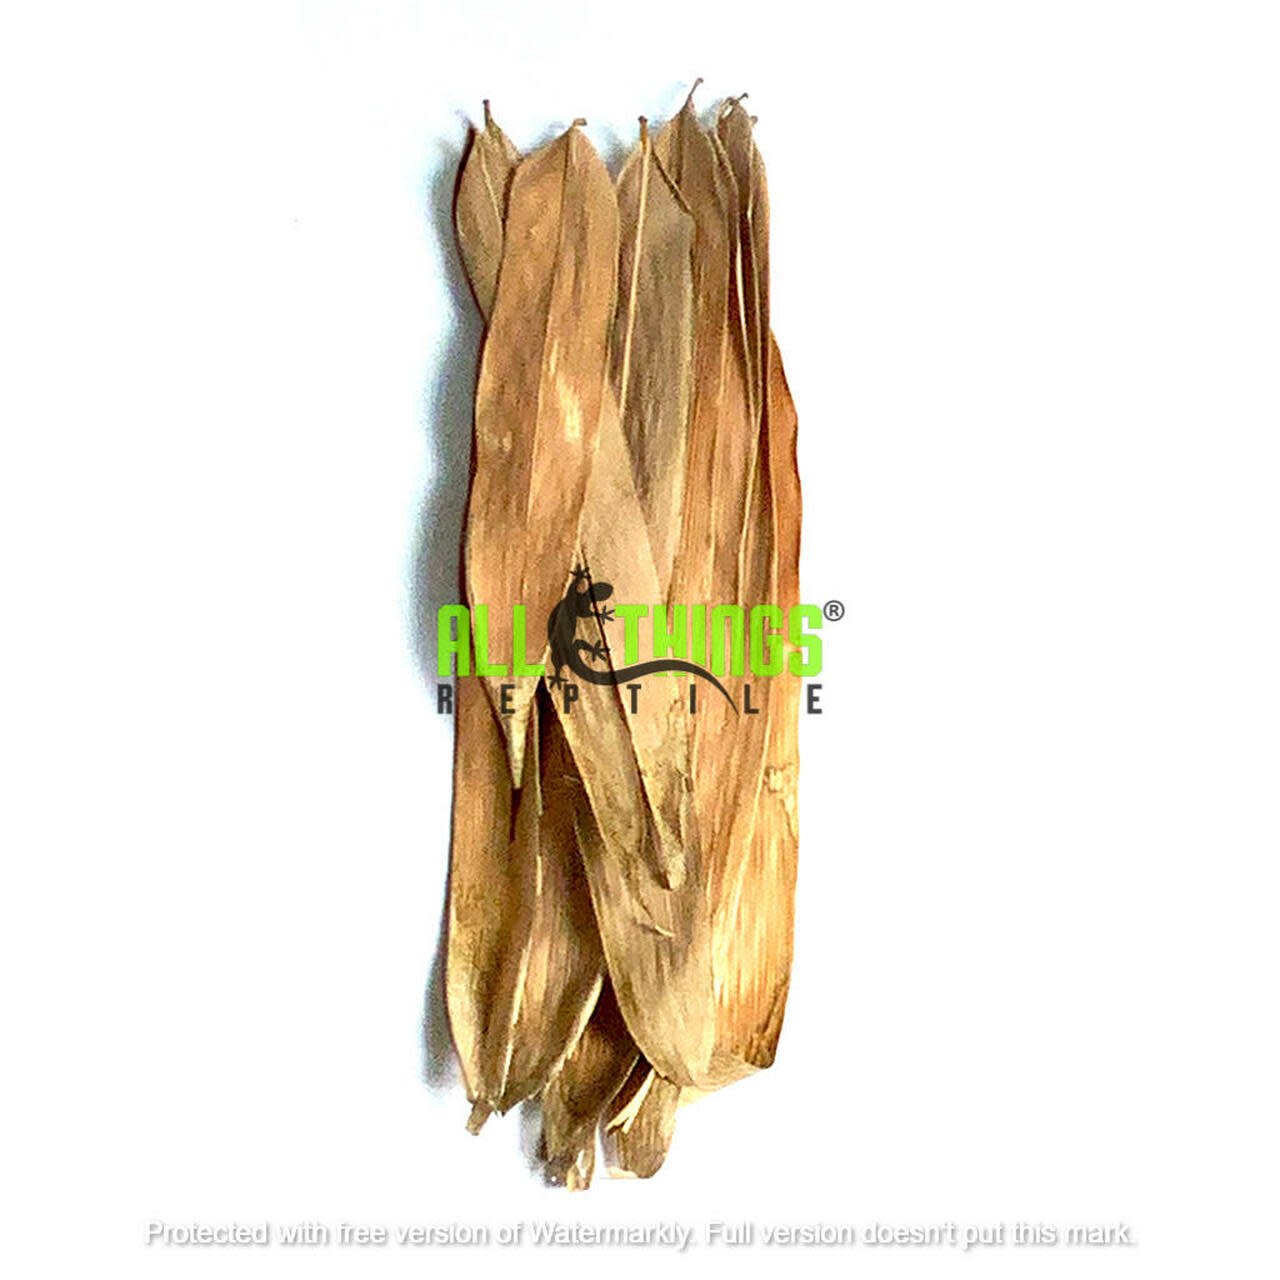 All things reptile Feuilles de bambou de différentes tailles pq 10 - Bamboo Mix Size Leaves 10-pack